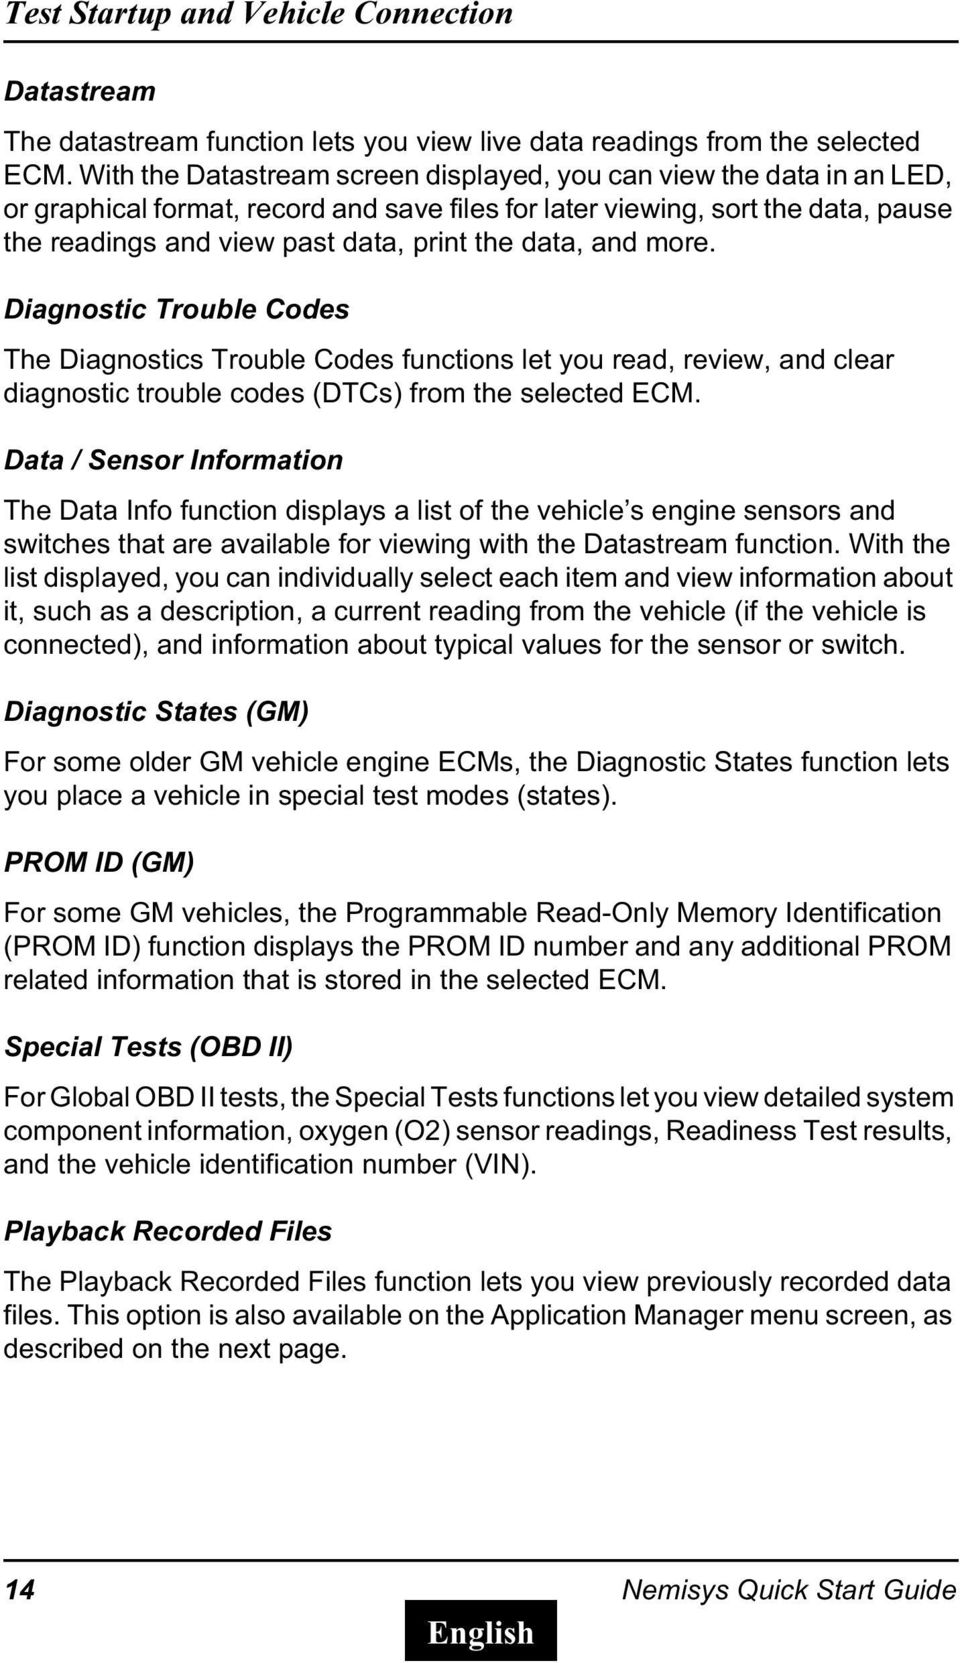 data, and more. Diagnostic Trouble Codes The Diagnostics Trouble Codes functions let you read, review, and clear diagnostic trouble codes (DTCs) from the selected ECM.